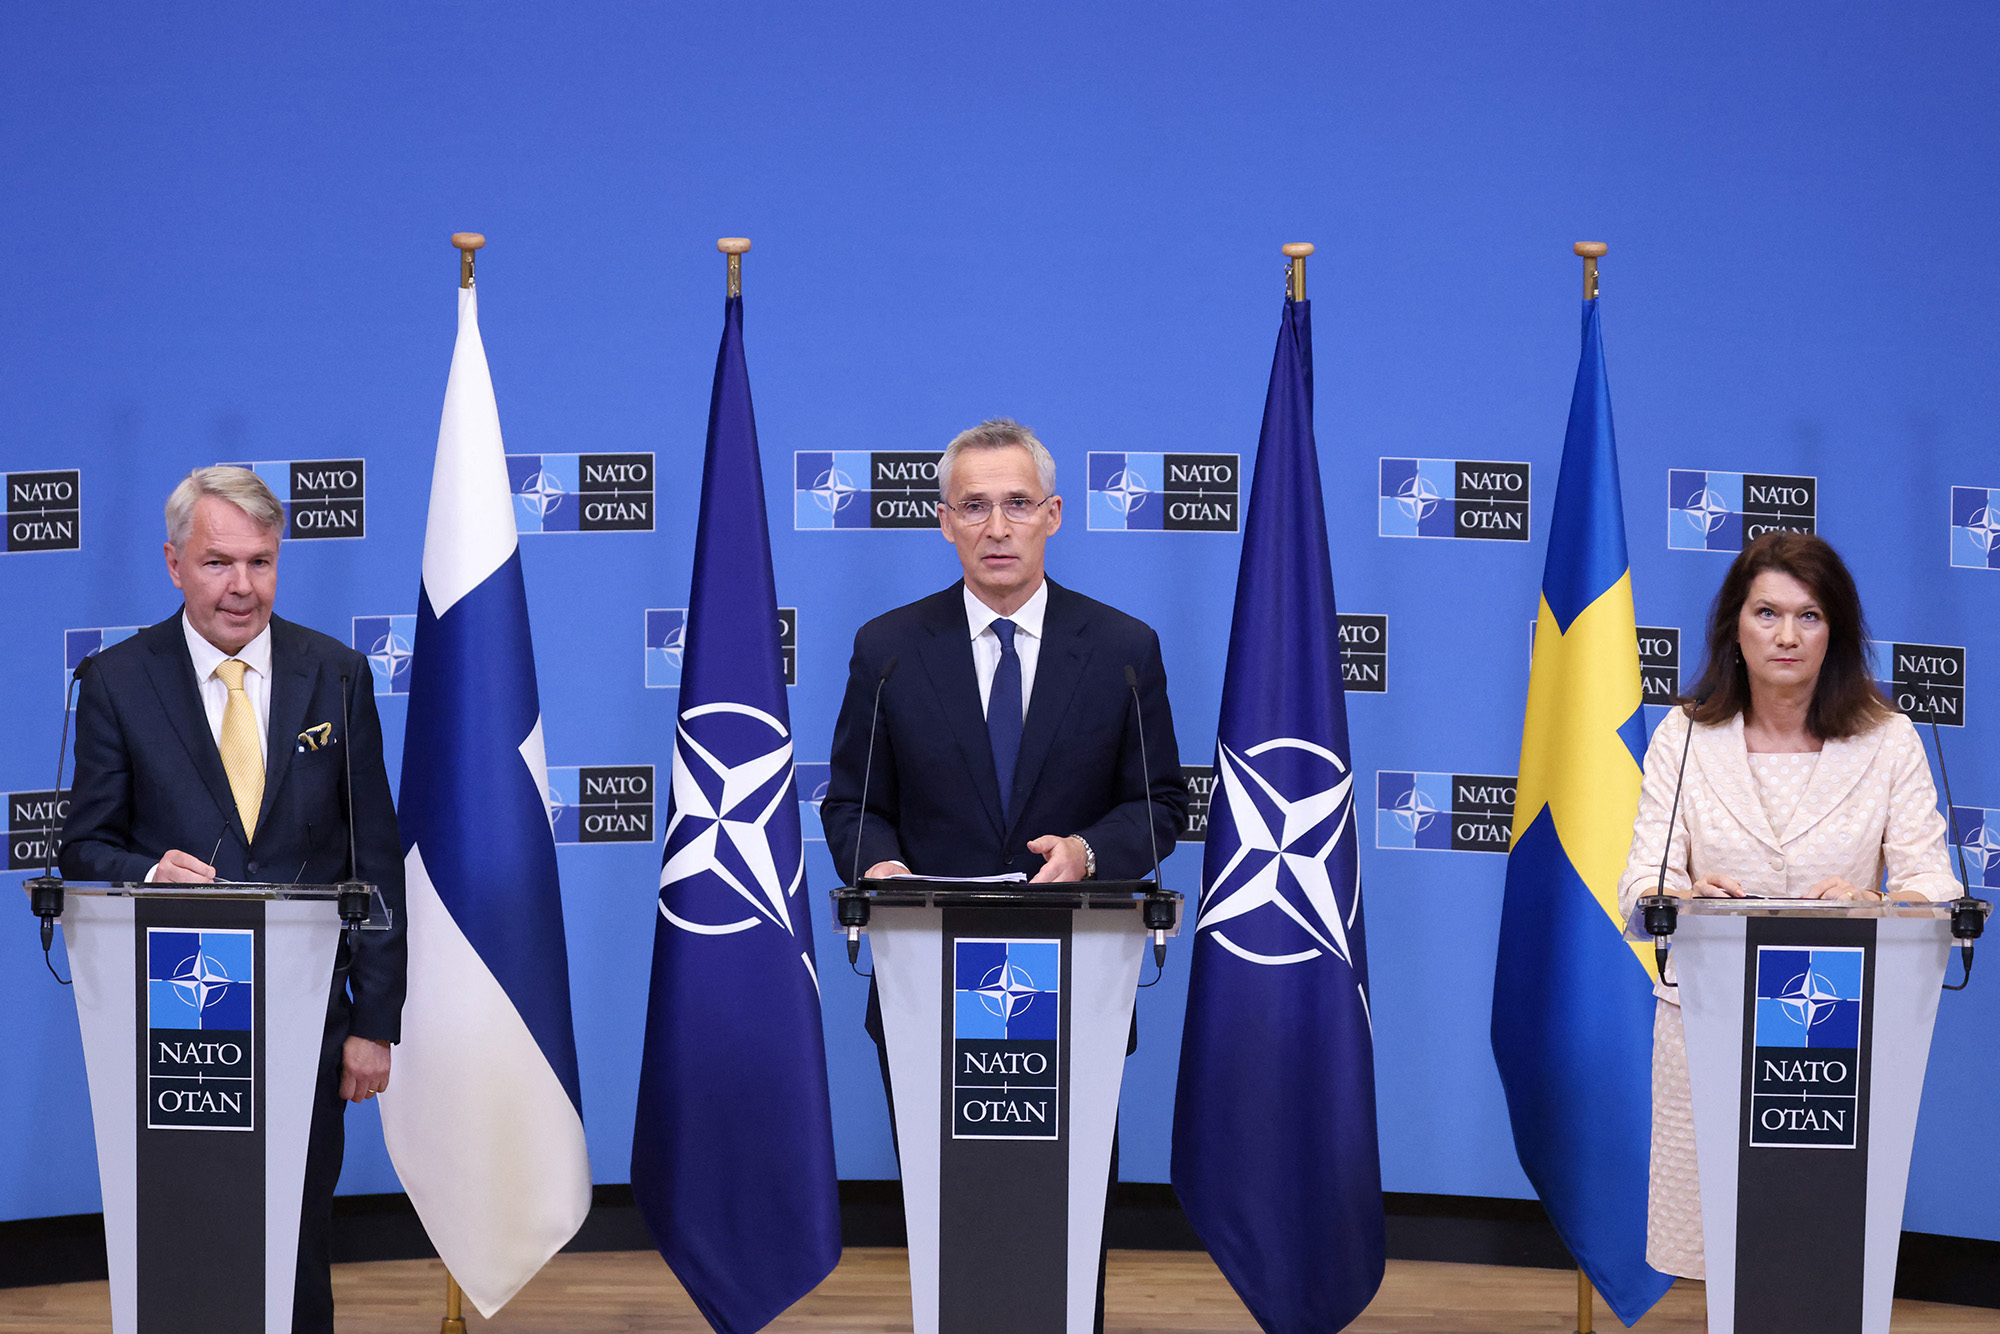 Finnish Foreign Minister Pekka Haavisto, left, NATO Secretary General Jens Stoltenberg, center, and Swedish Ministry for Foreign Affairs Anne Linde, right, give a press conference after the signing of the accession protocols of Finland and Sweden at the NATO headquarters in Brussels, Belgium, on July 5.